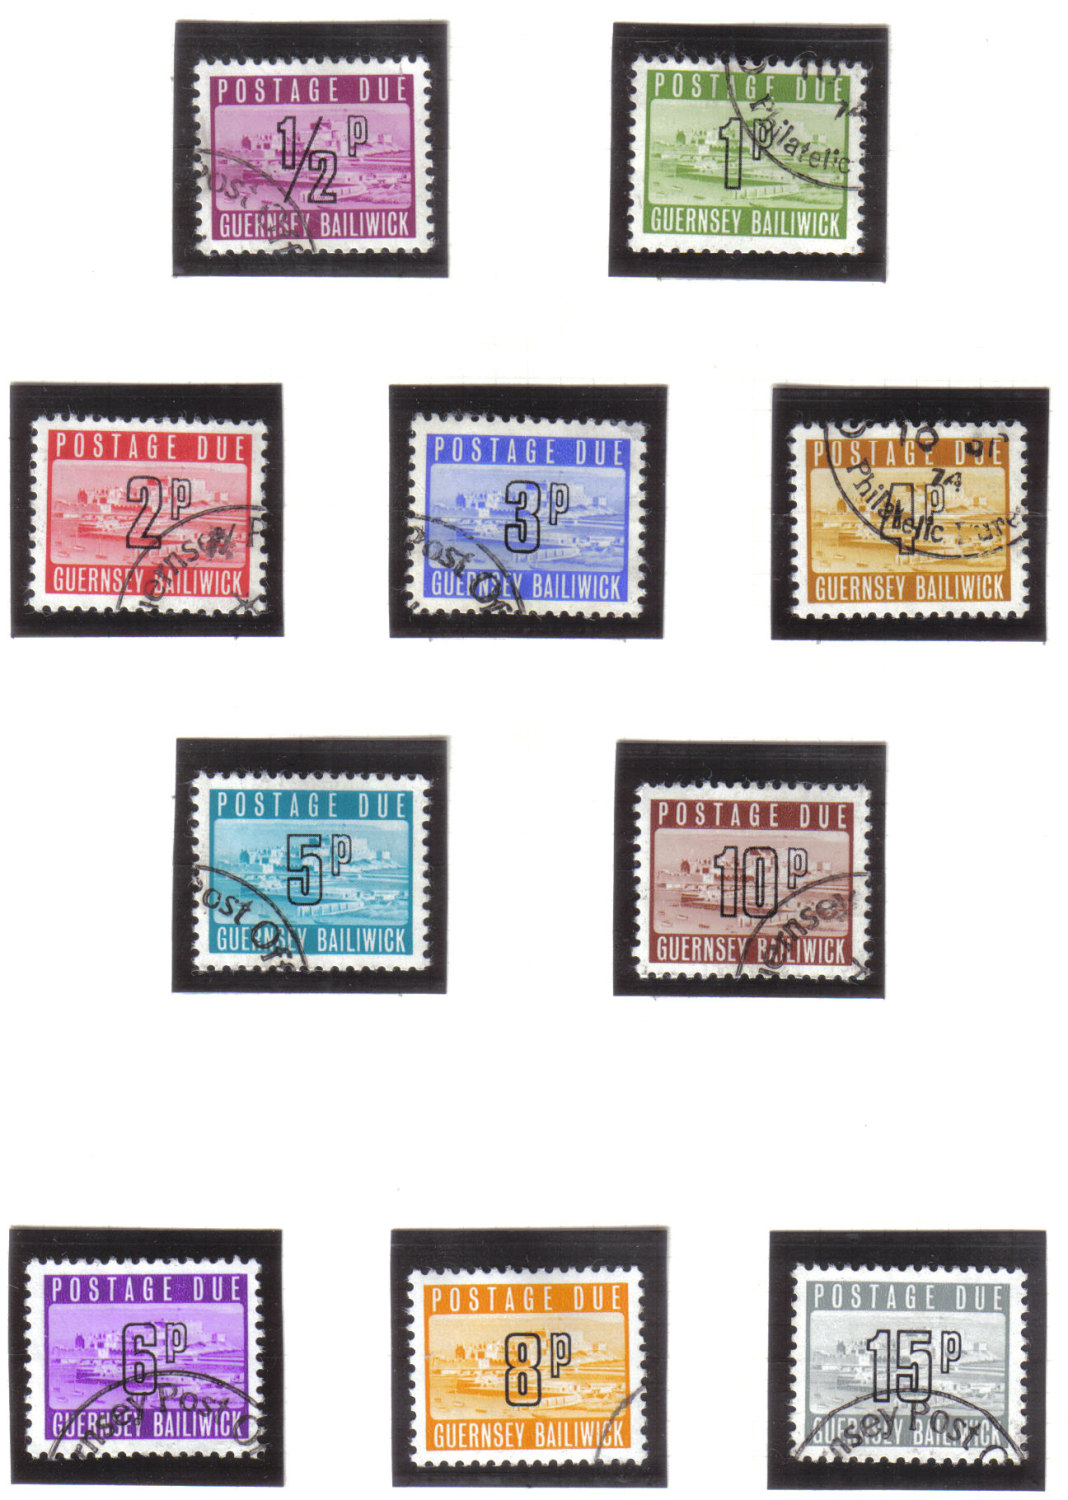 Guernsey Stamps 1971 Postage Dues - USED (z605)